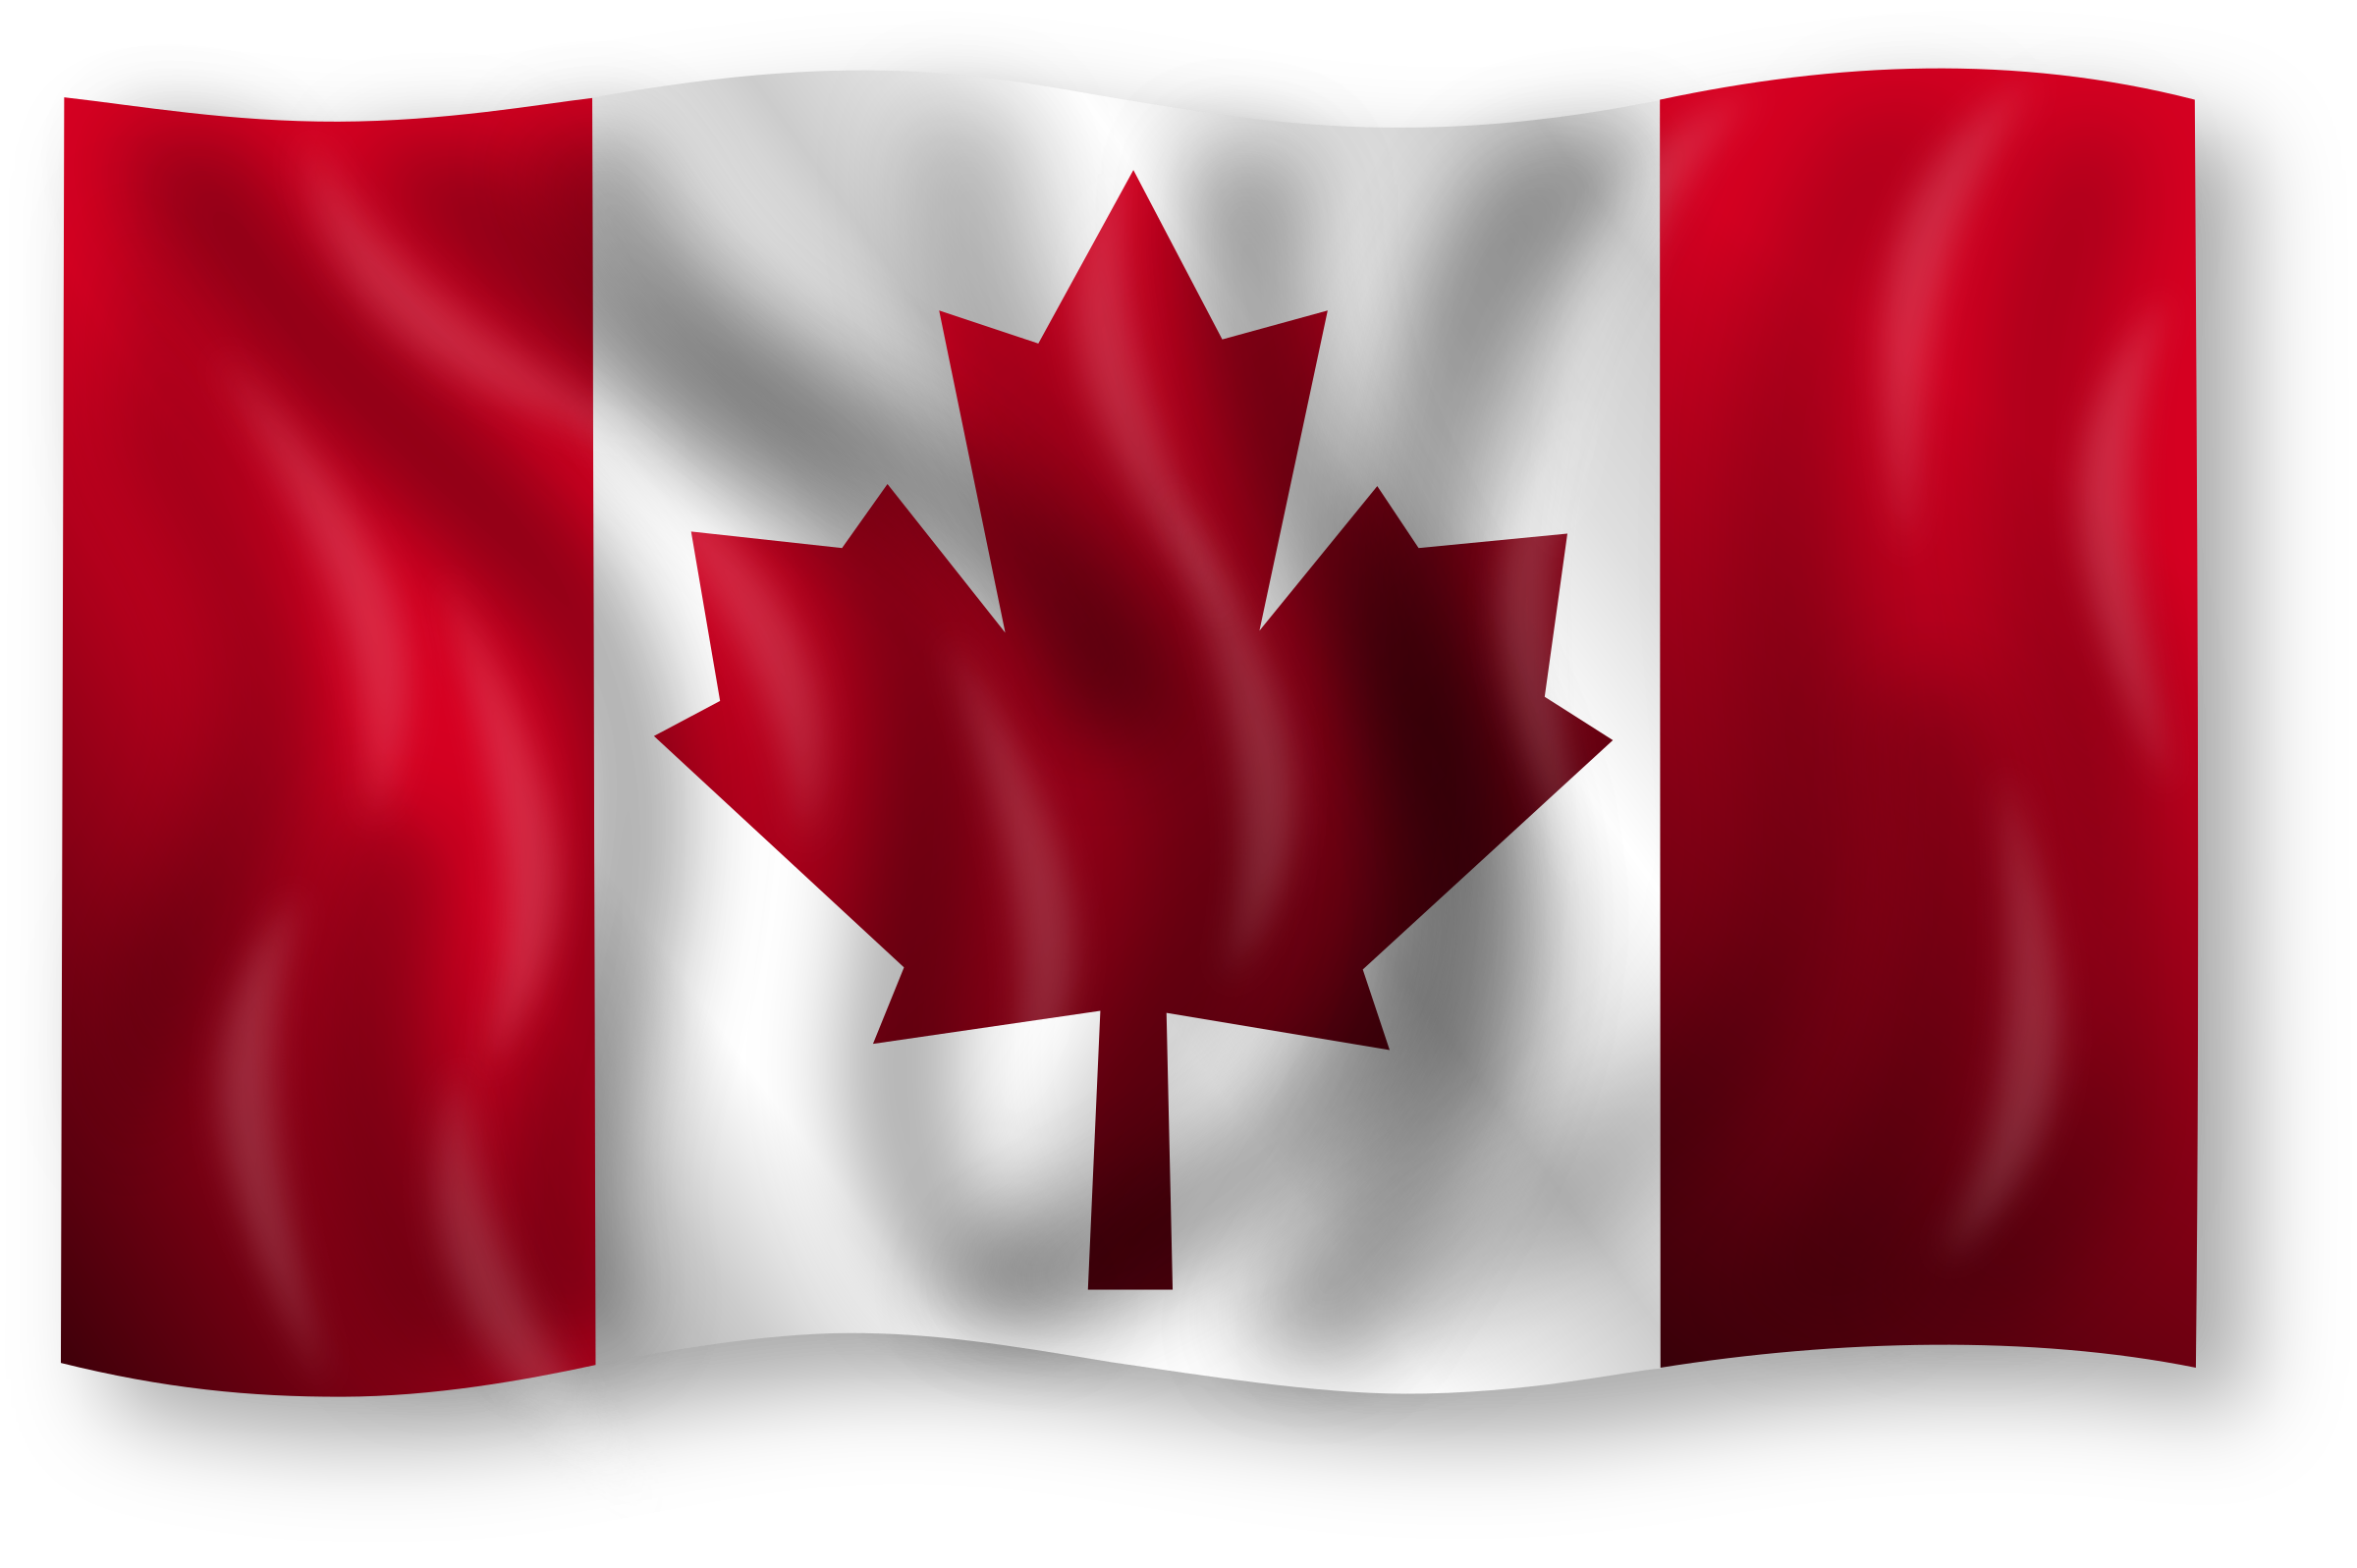 Canada flag PNG transparent image download, size: 2400x1597px